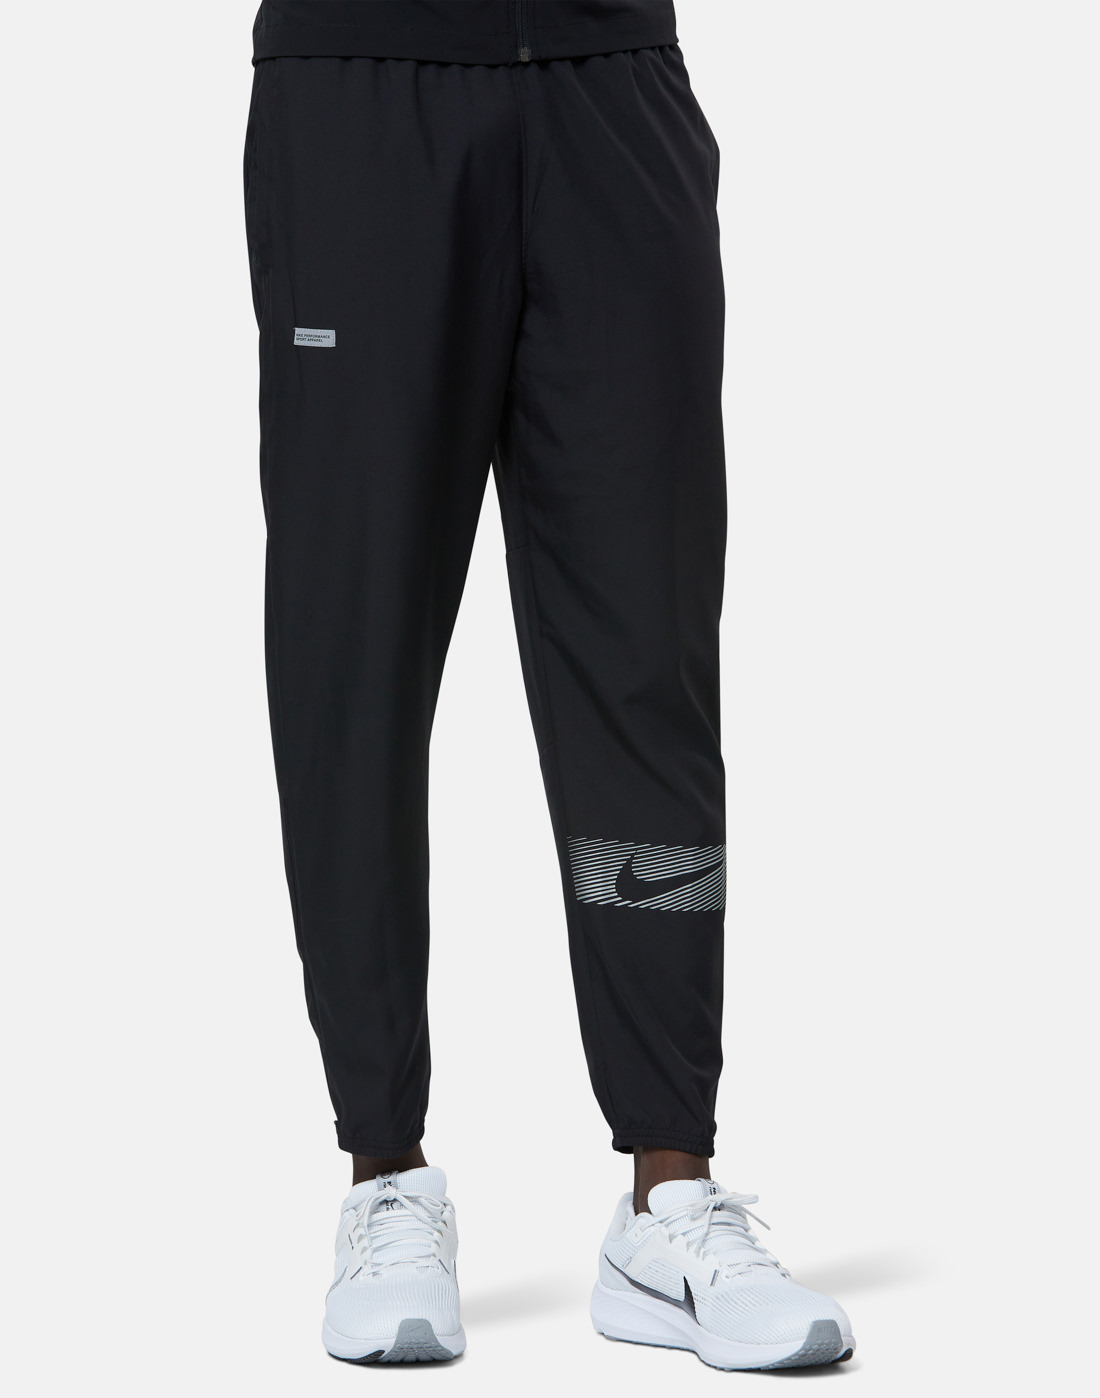 Nike Mens Flash Challenger Woven Pants - Black | Life Style Sports IE